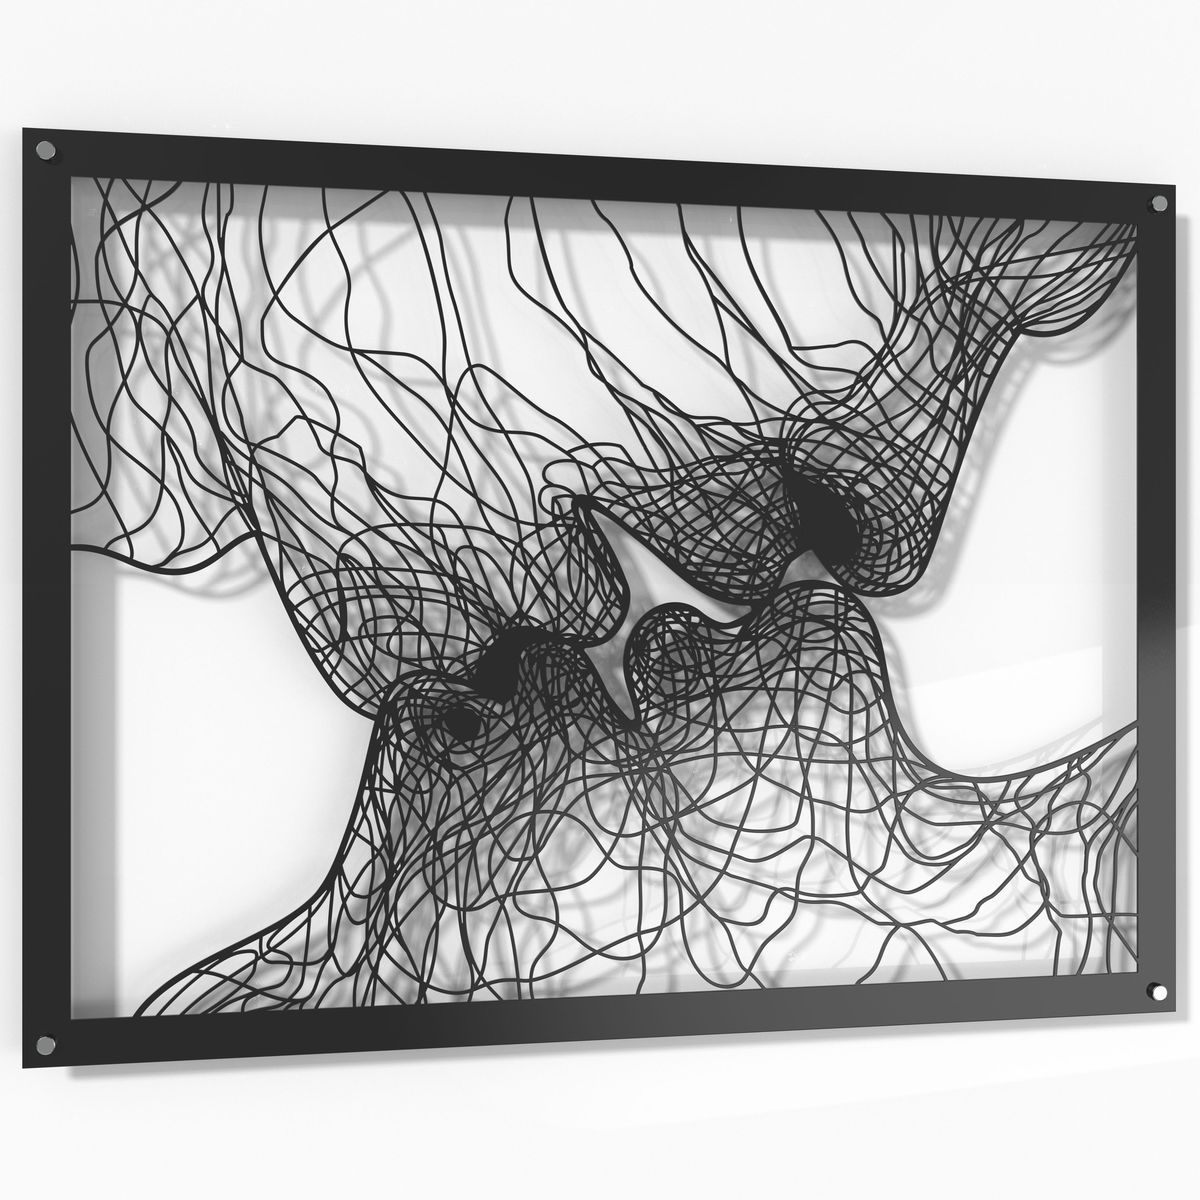 Intertwined Raised Metal Wall Art Home Décor - 60x80cm By Unexpected Worx